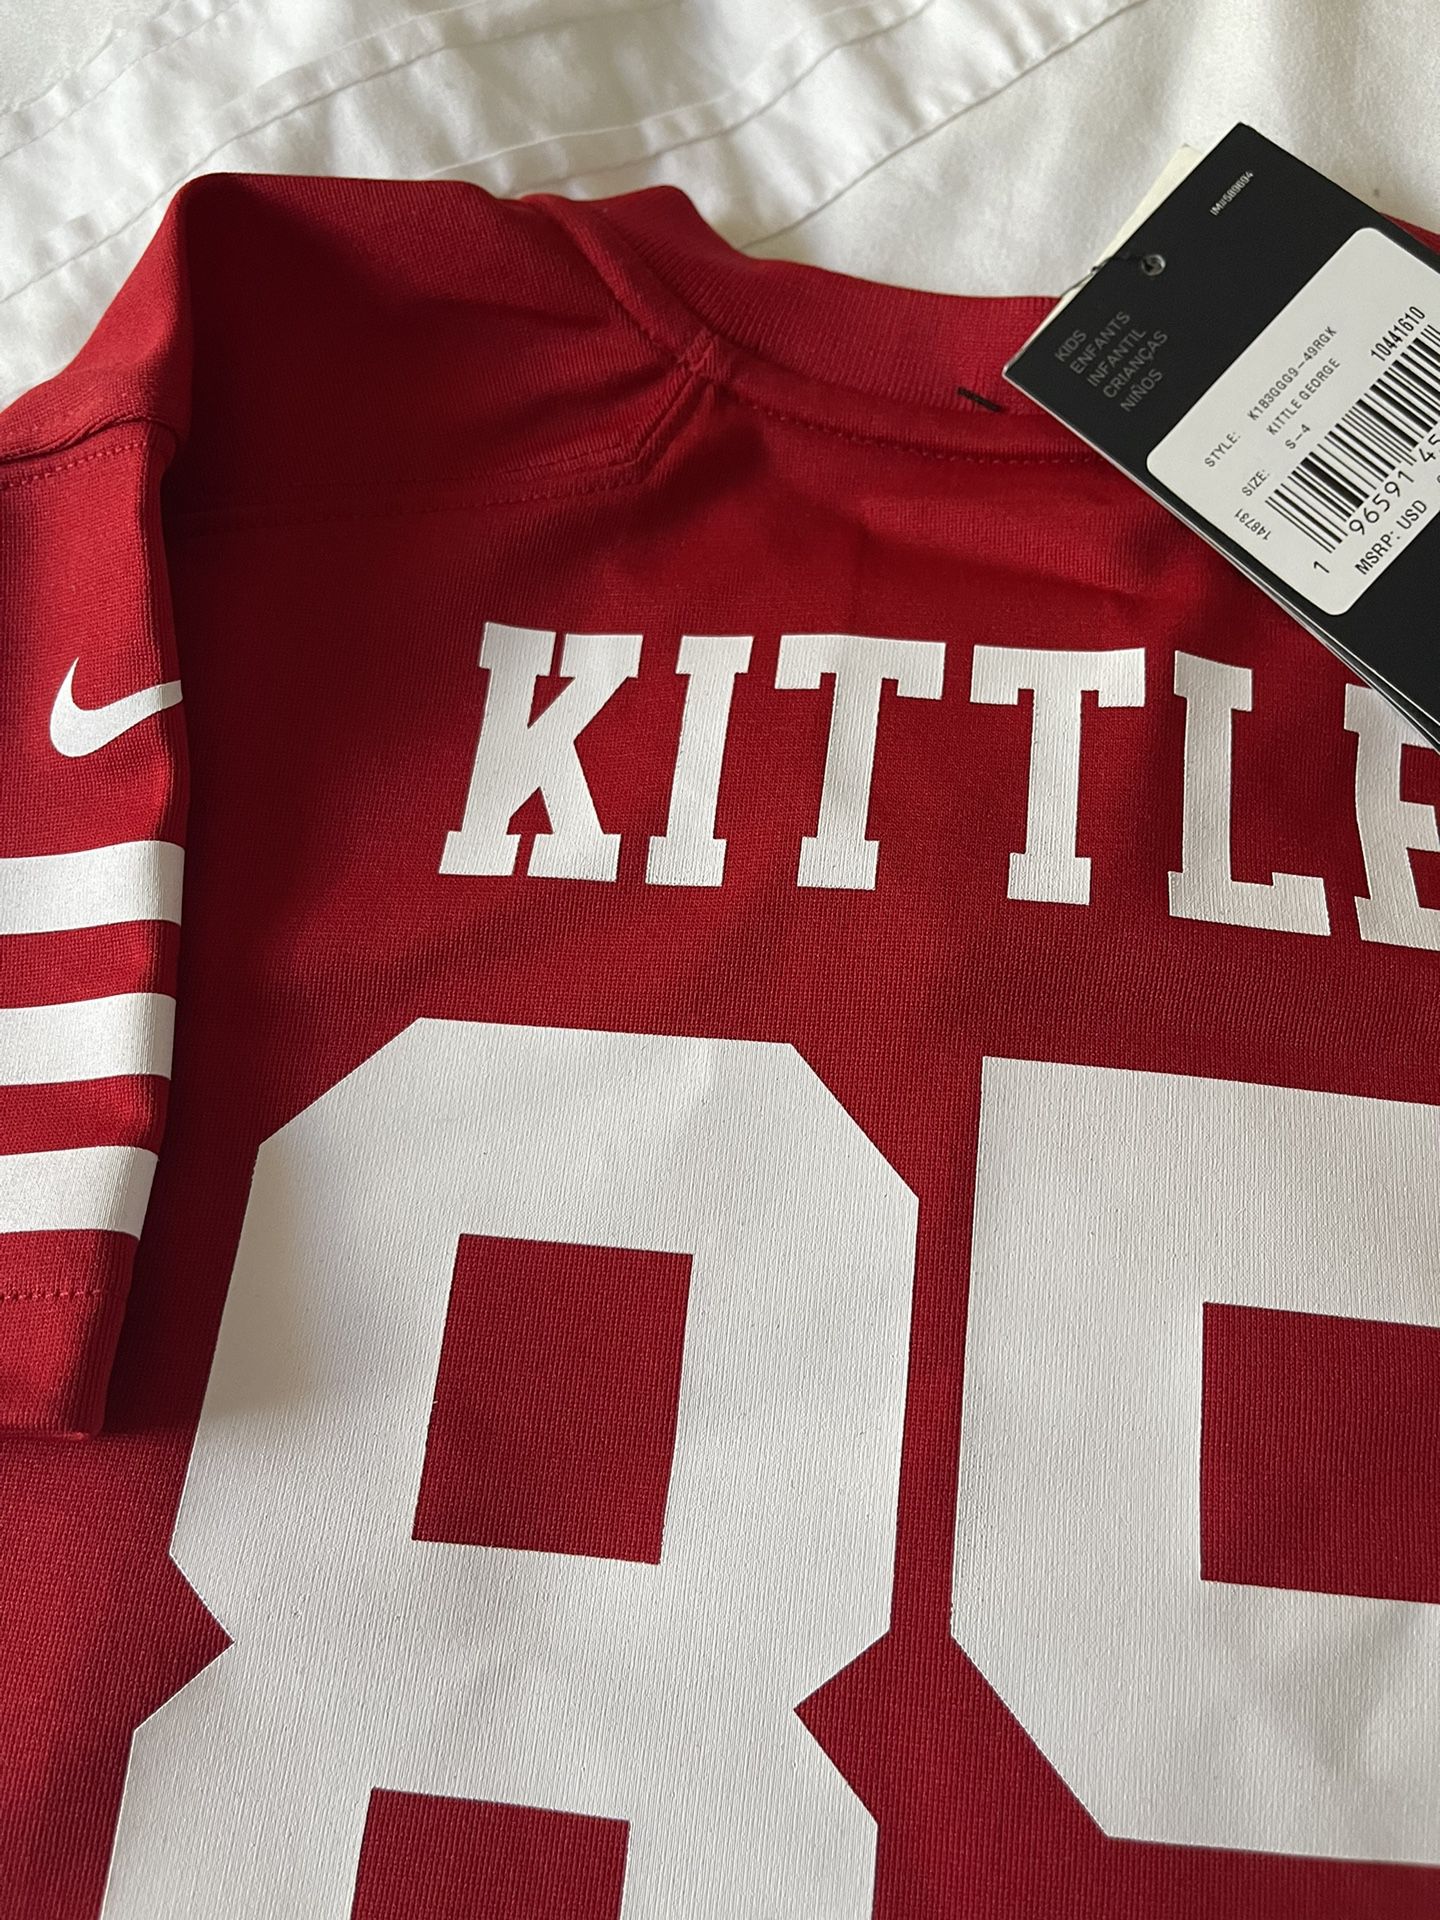 49ers Nike Stitched Jerseys Mens Womens And Kids See Prices for Sale in  Fontana, CA - OfferUp